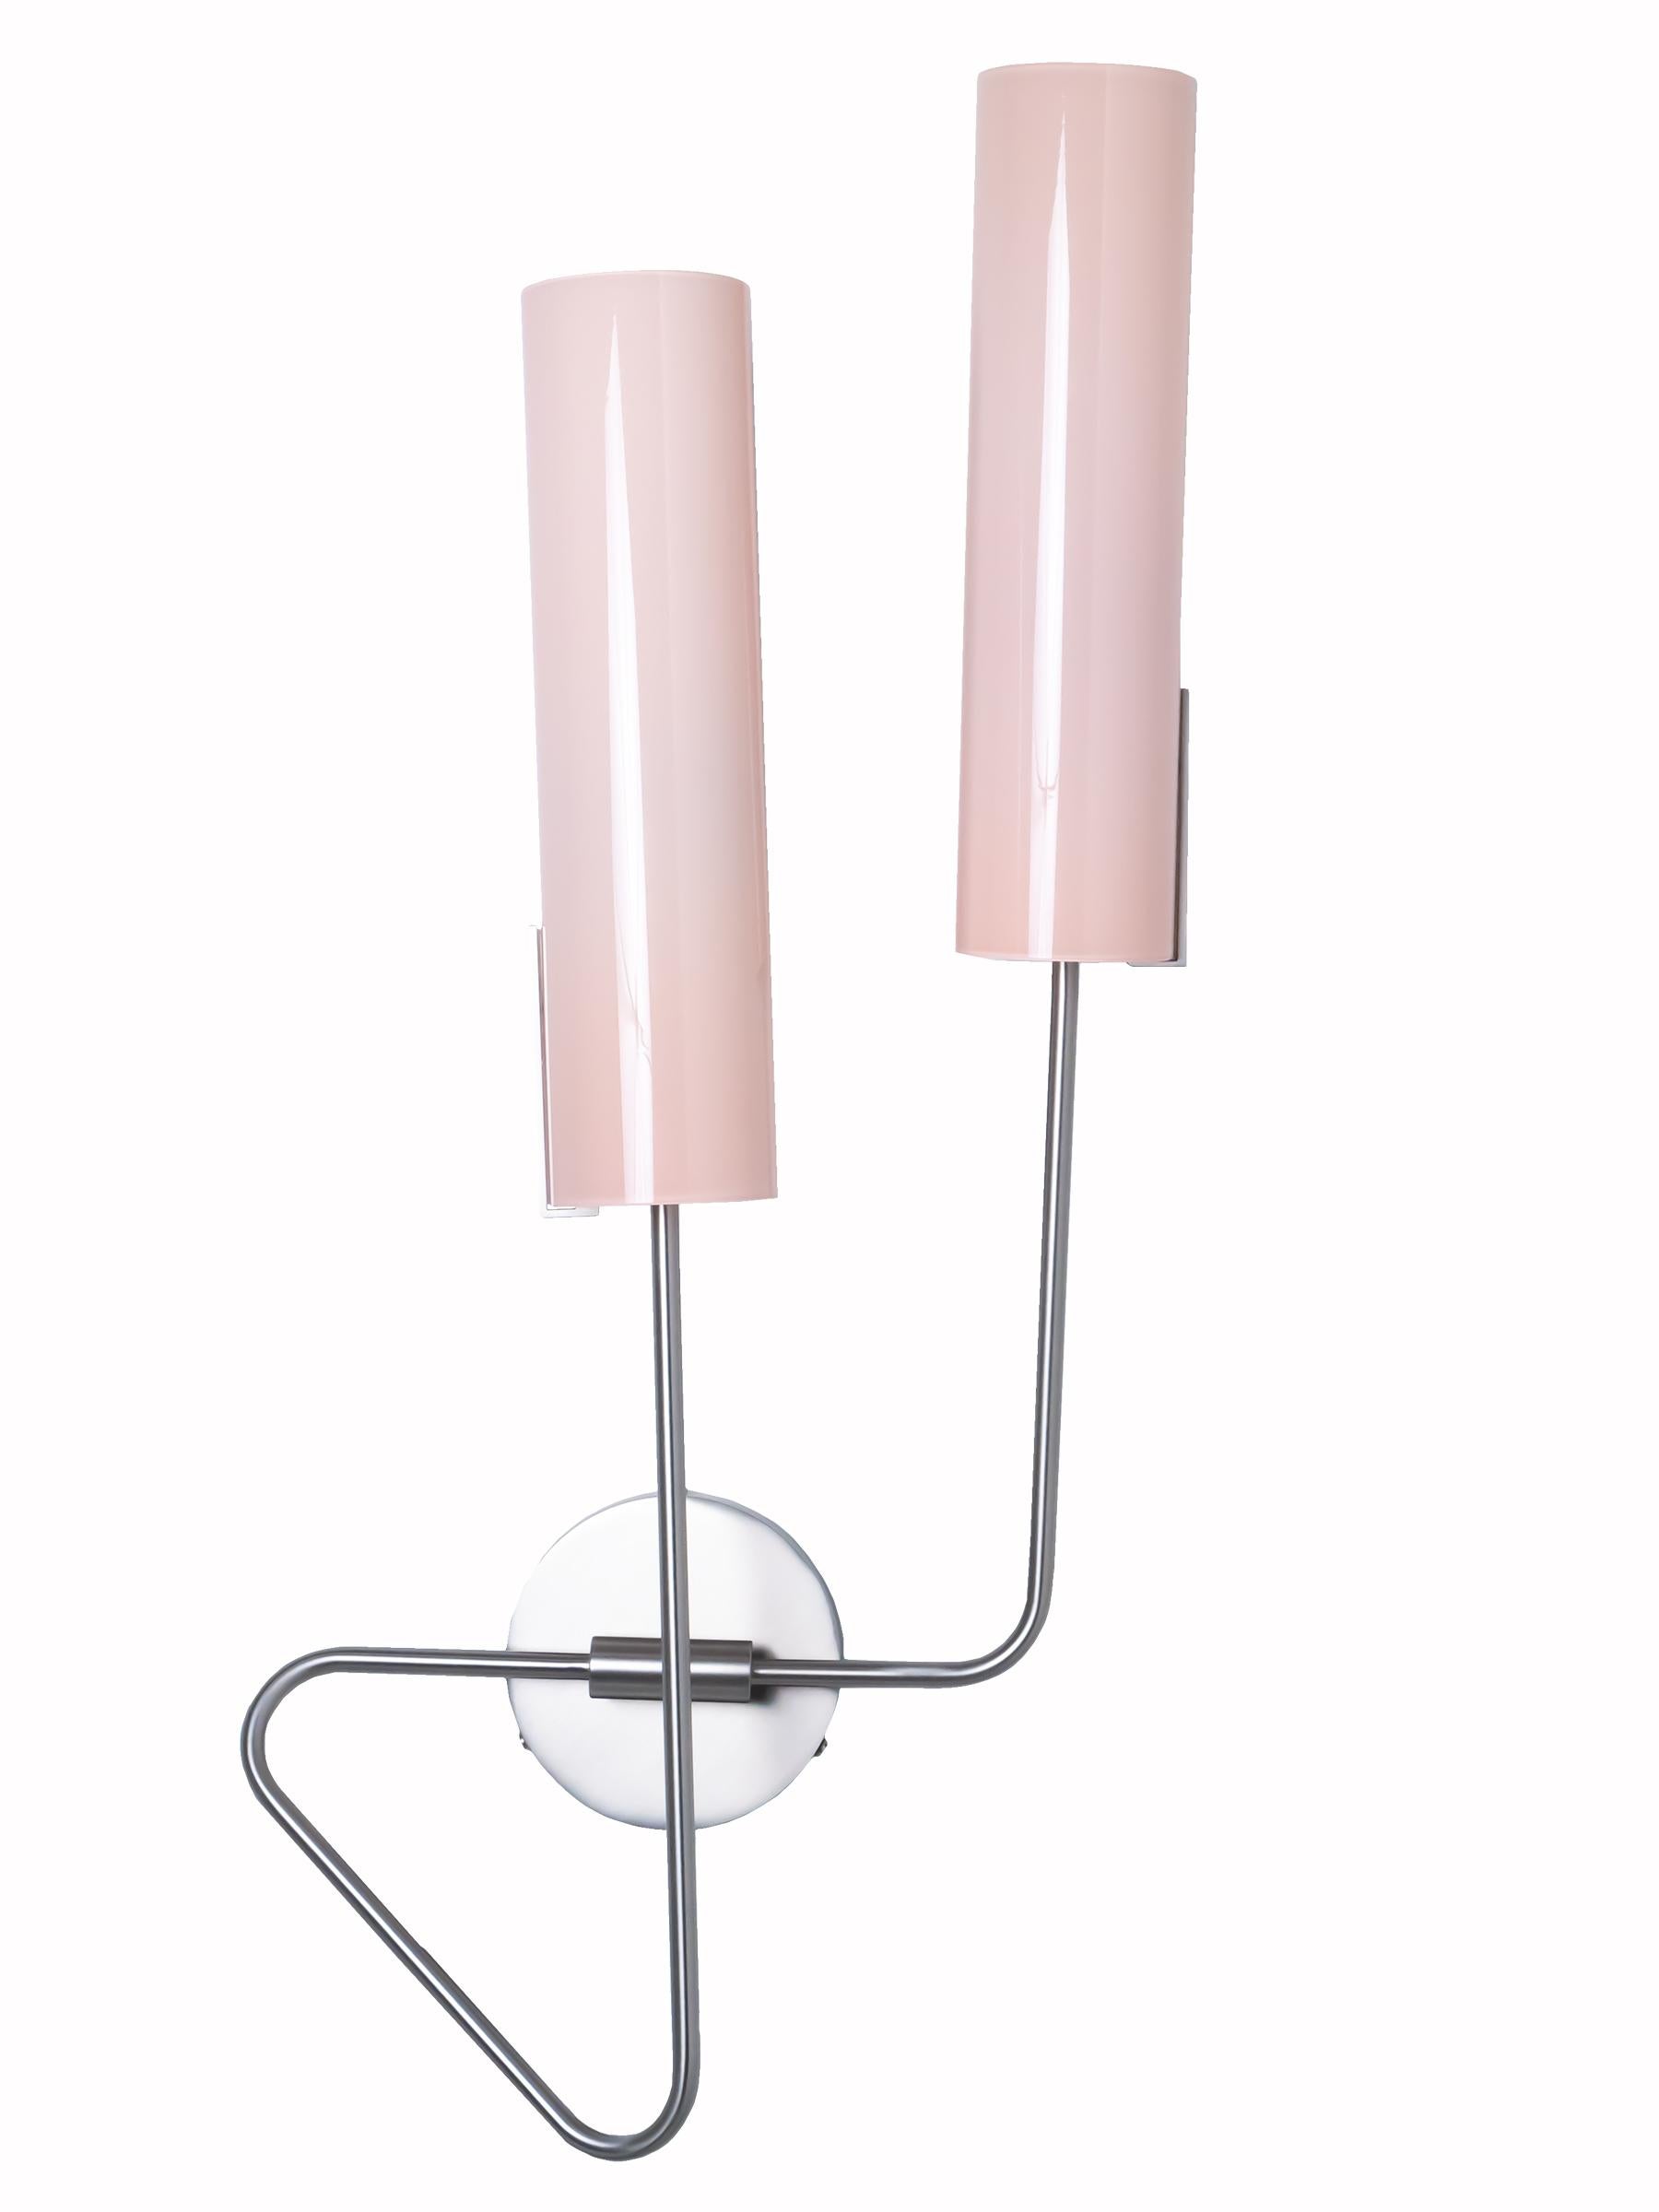 American Continuum 01 Sconce: Satin Nickel/Slate Ombre Glass Shades by Avram Rusu Studio For Sale